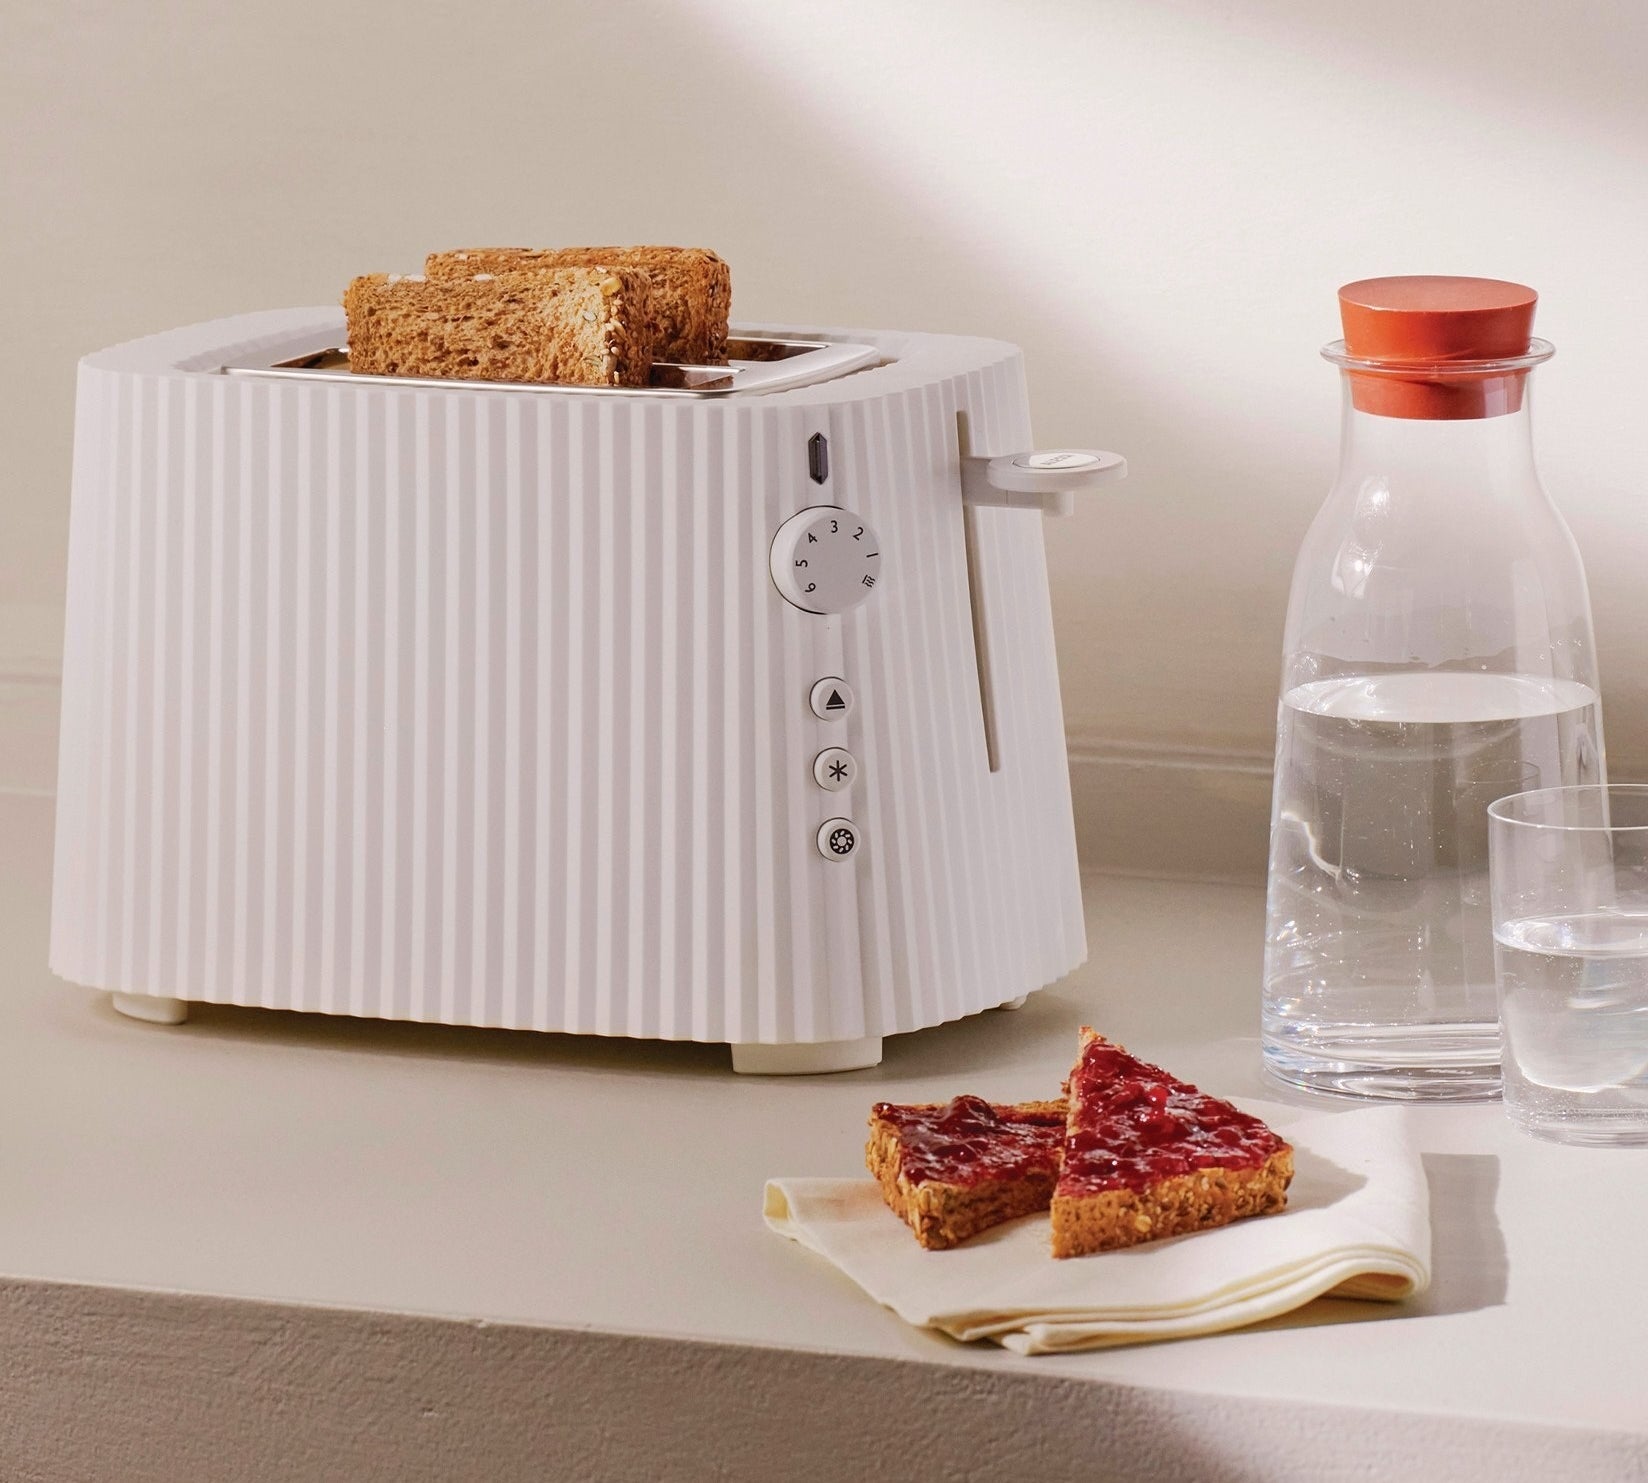 the white pleated toaster holding two pieces of toast and placed next to some jam-covered pieces of toast and water